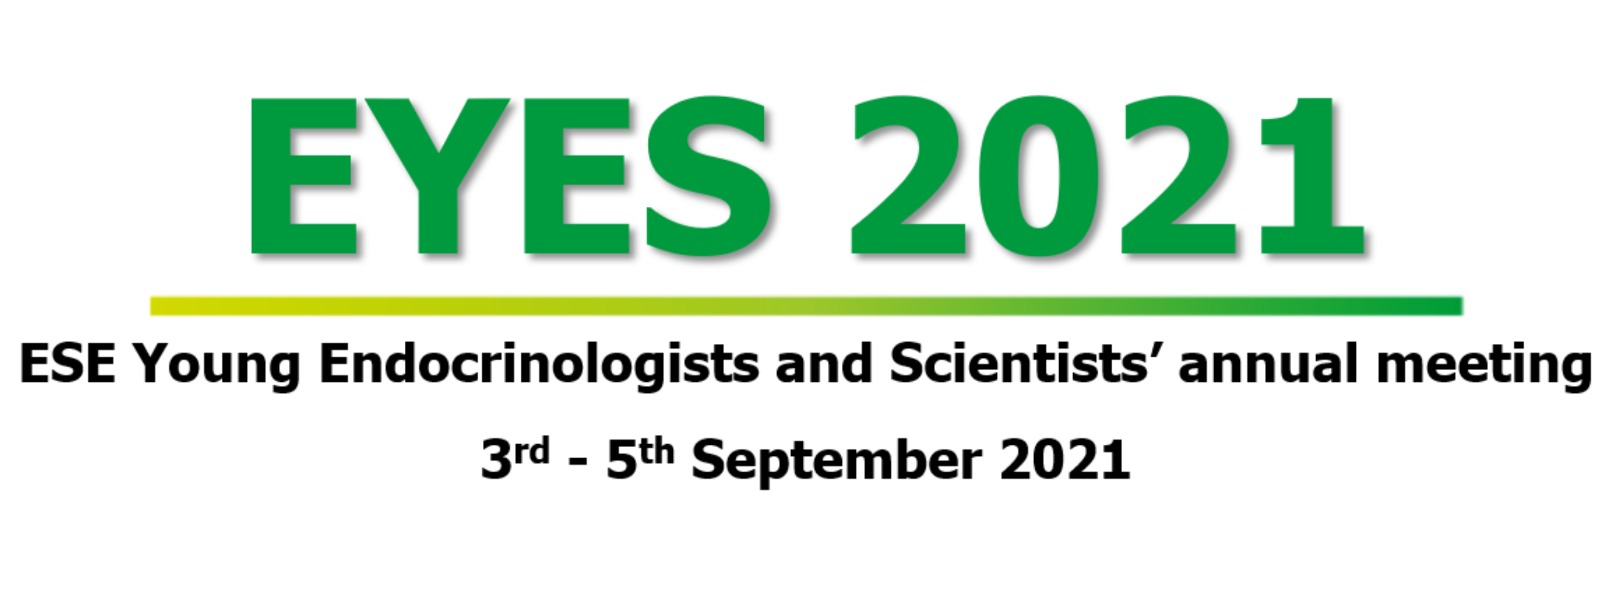 EYES 2021 ESE Young Endocrinologists and Scientists' annual meeting Home Page